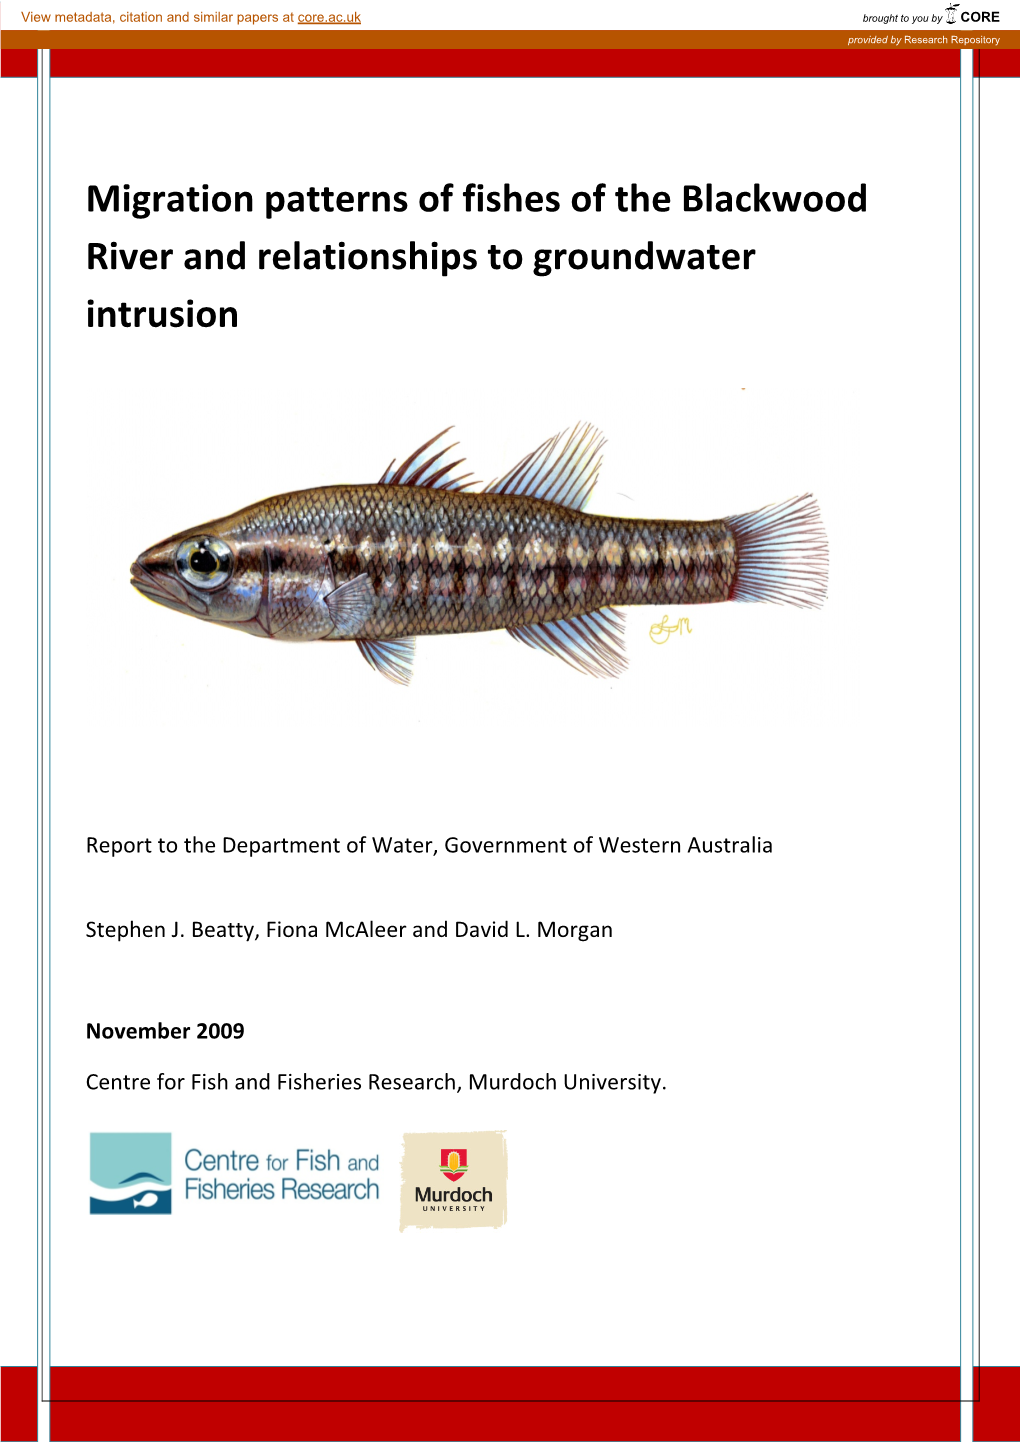 Migration Patterns of Fishes of the Blackwood River and Relationships to Groundwater Intrusion